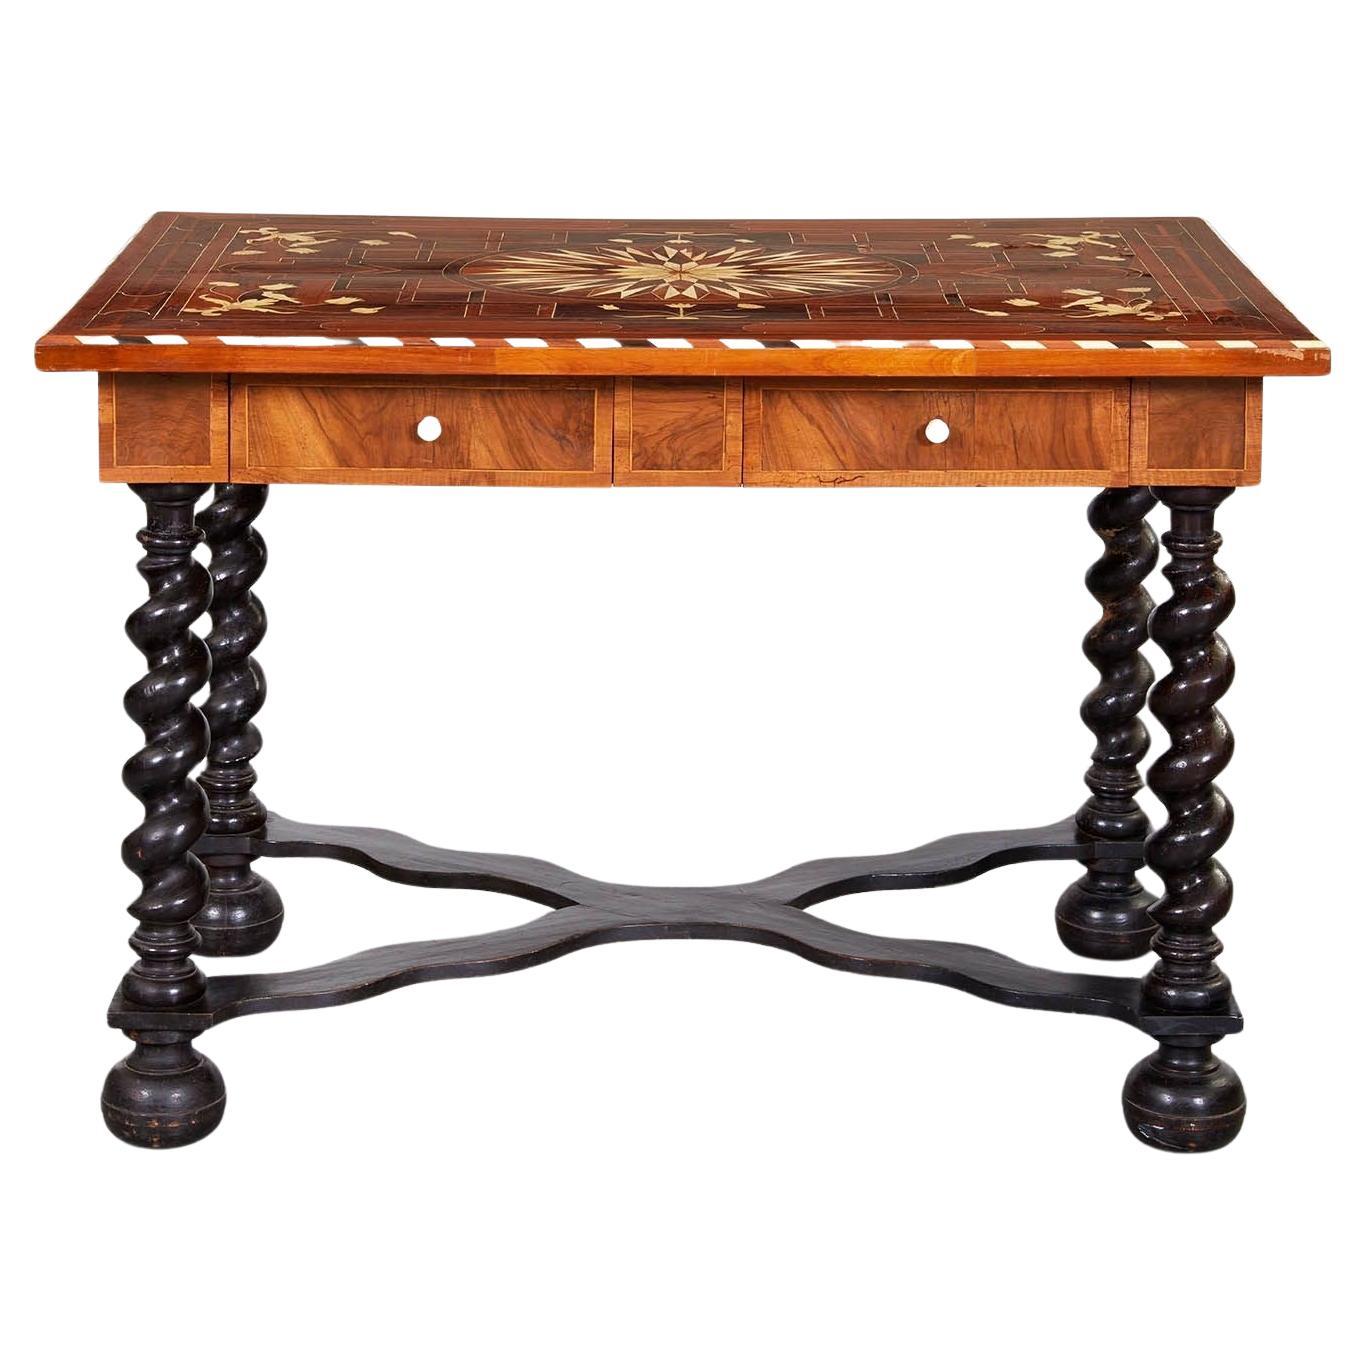 Flemish Baroque Inlaid Center Table For Sale